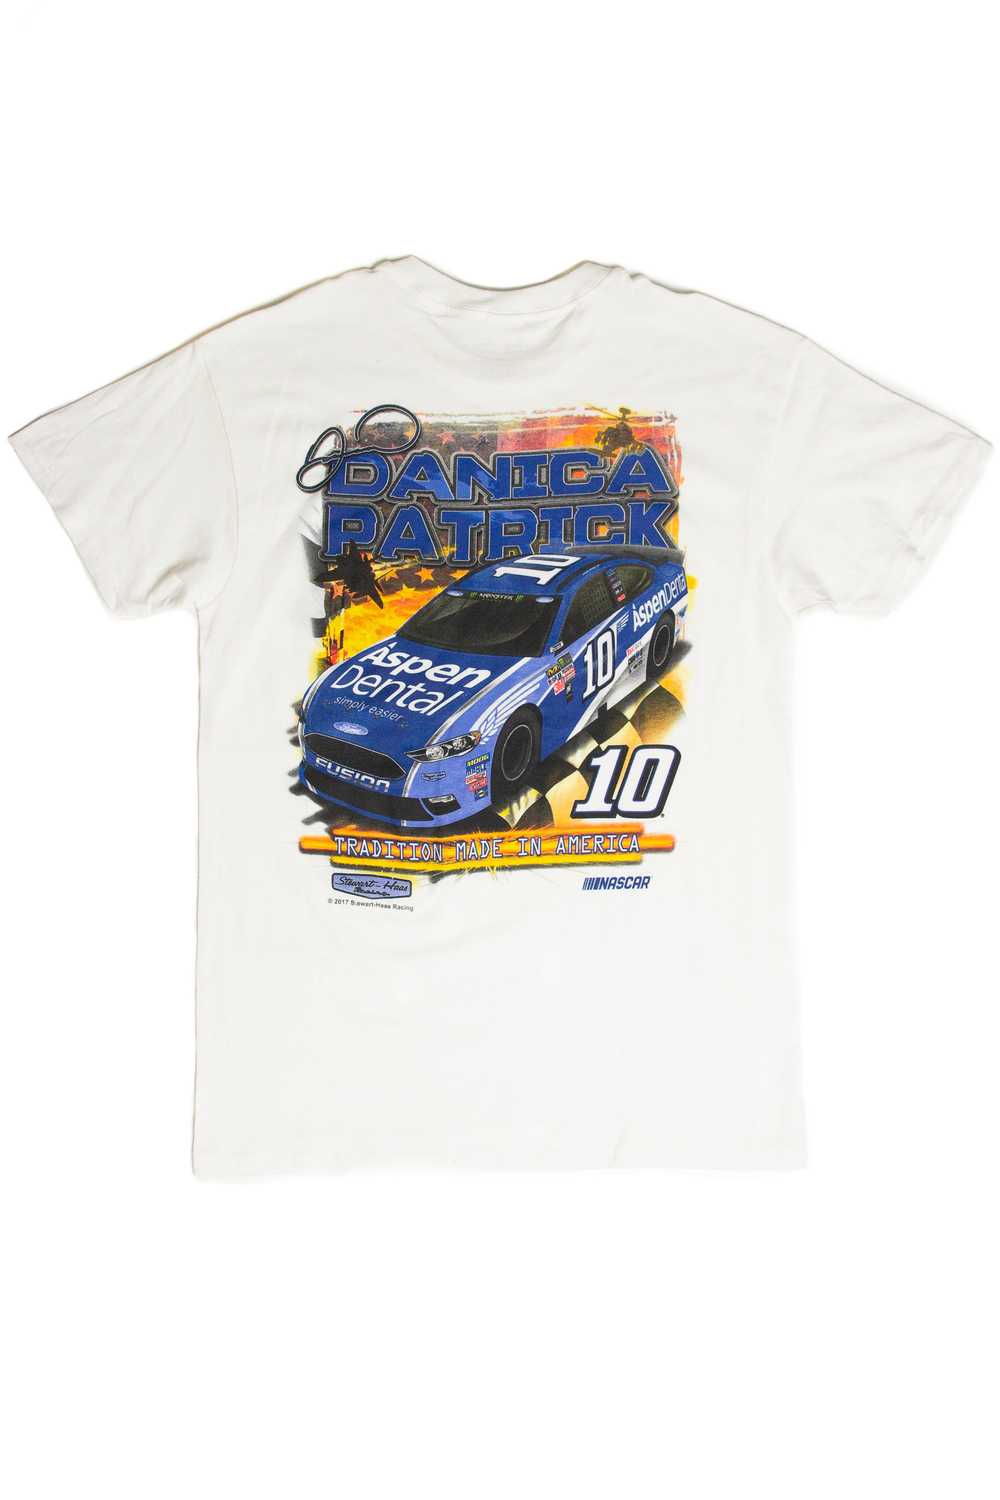 Recycled Danica Patrick T-Shirt (2017) - image 2